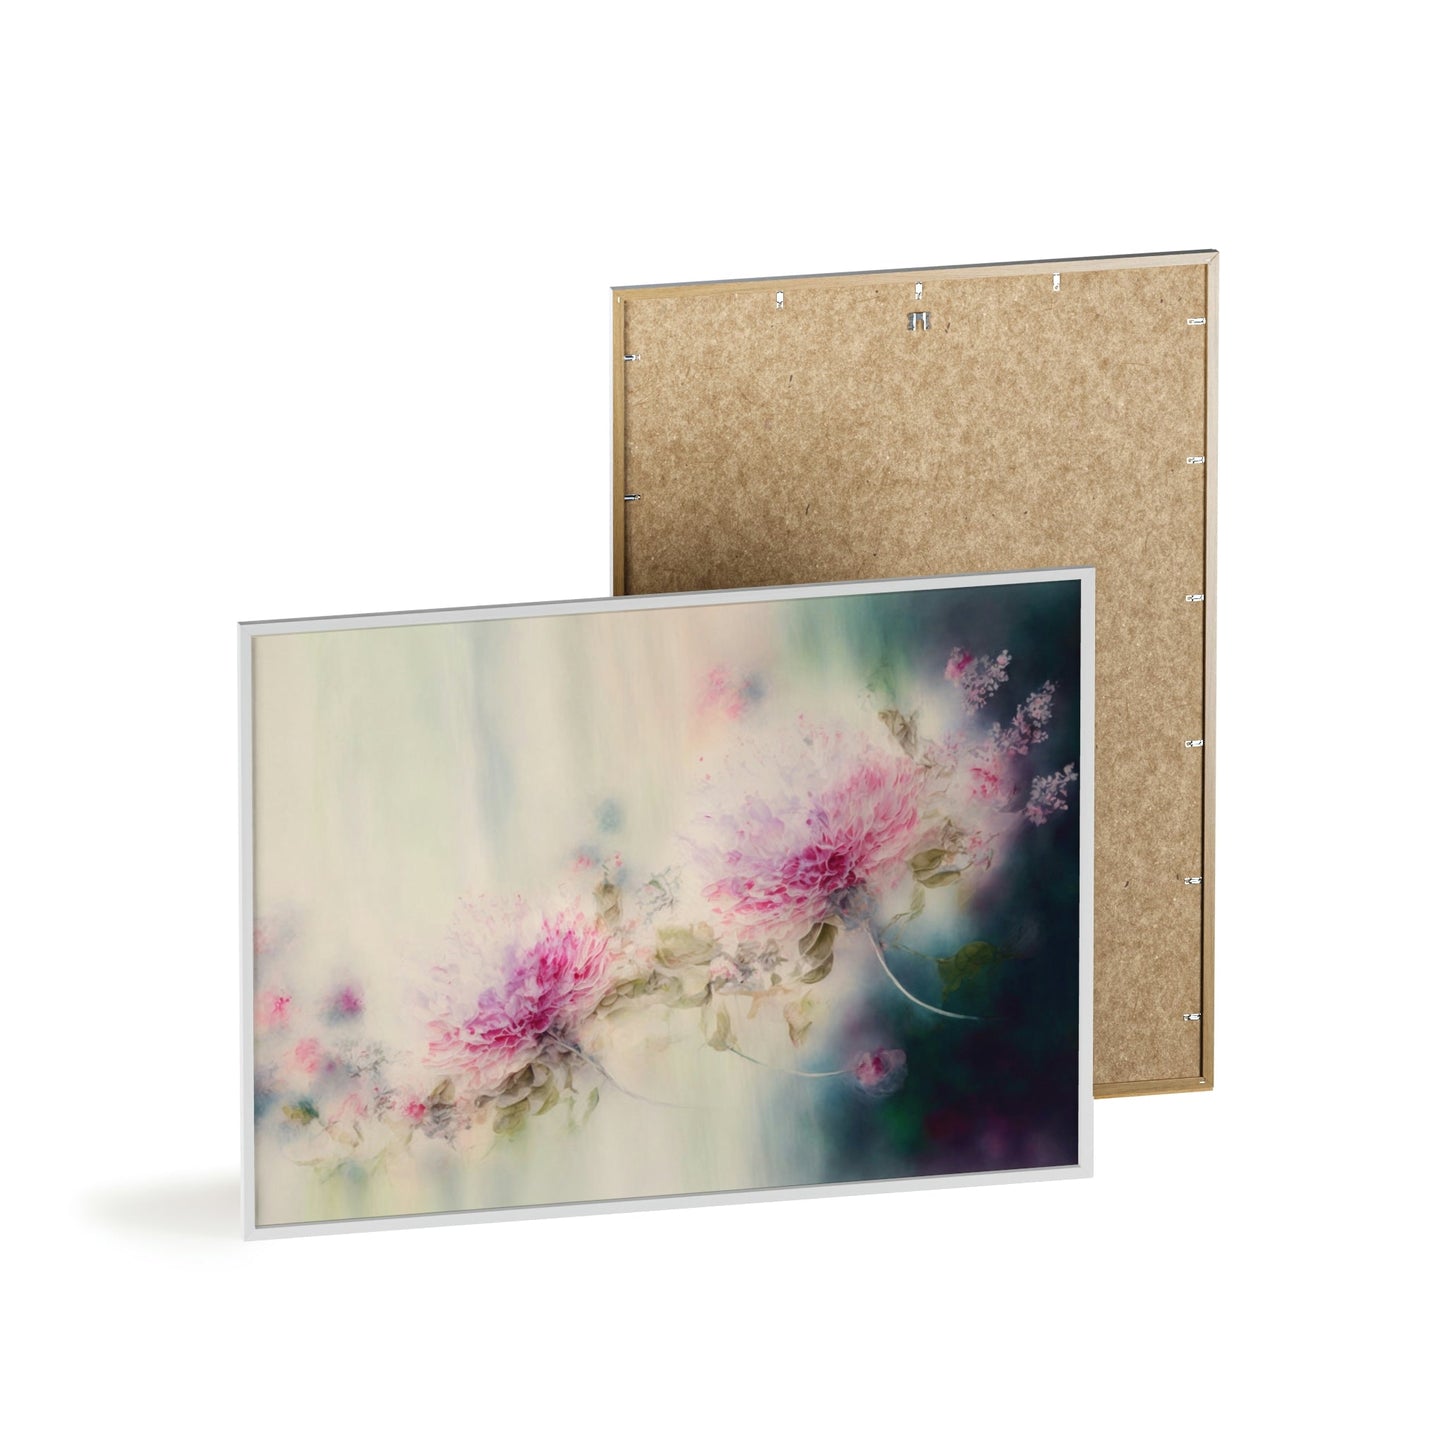 Ethereal Beauty: Canvas & Poster Print of Abstract Floral Artwork